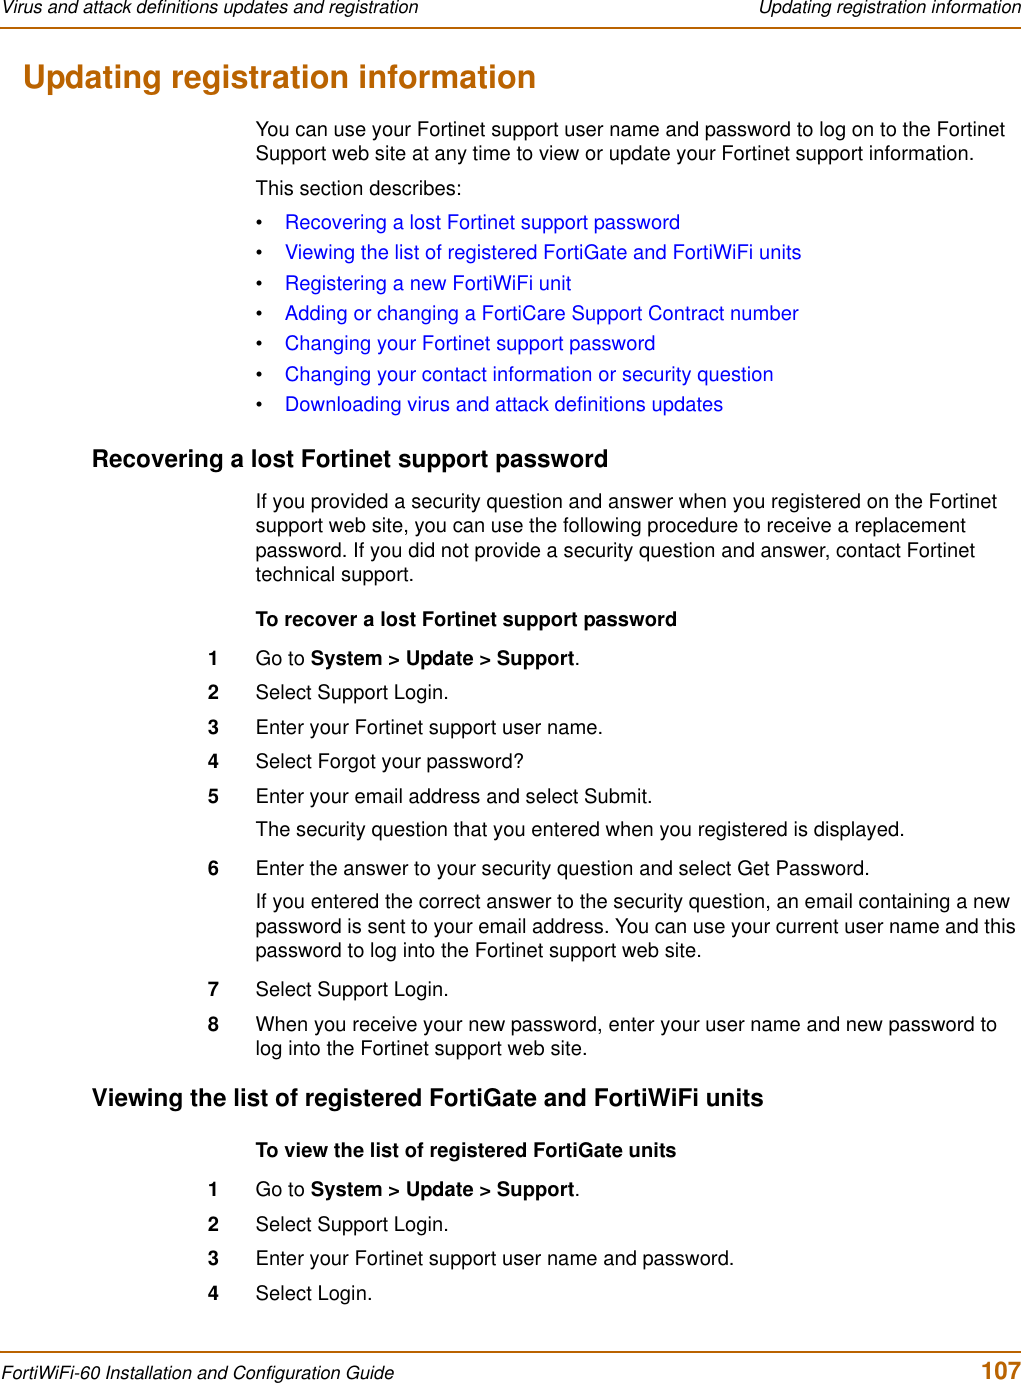 Virus and attack definitions updates and registration  Updating registration informationFortiWiFi-60 Installation and Configuration Guide  107Updating registration informationYou can use your Fortinet support user name and password to log on to the Fortinet Support web site at any time to view or update your Fortinet support information.This section describes:•Recovering a lost Fortinet support password•Viewing the list of registered FortiGate and FortiWiFi units•Registering a new FortiWiFi unit•Adding or changing a FortiCare Support Contract number•Changing your Fortinet support password•Changing your contact information or security question•Downloading virus and attack definitions updatesRecovering a lost Fortinet support passwordIf you provided a security question and answer when you registered on the Fortinet support web site, you can use the following procedure to receive a replacement password. If you did not provide a security question and answer, contact Fortinet technical support.To recover a lost Fortinet support password1Go to System &gt; Update &gt; Support.2Select Support Login.3Enter your Fortinet support user name.4Select Forgot your password?5Enter your email address and select Submit.The security question that you entered when you registered is displayed.6Enter the answer to your security question and select Get Password.If you entered the correct answer to the security question, an email containing a new password is sent to your email address. You can use your current user name and this password to log into the Fortinet support web site.7Select Support Login.8When you receive your new password, enter your user name and new password to log into the Fortinet support web site.Viewing the list of registered FortiGate and FortiWiFi unitsTo view the list of registered FortiGate units1Go to System &gt; Update &gt; Support.2Select Support Login.3Enter your Fortinet support user name and password.4Select Login.